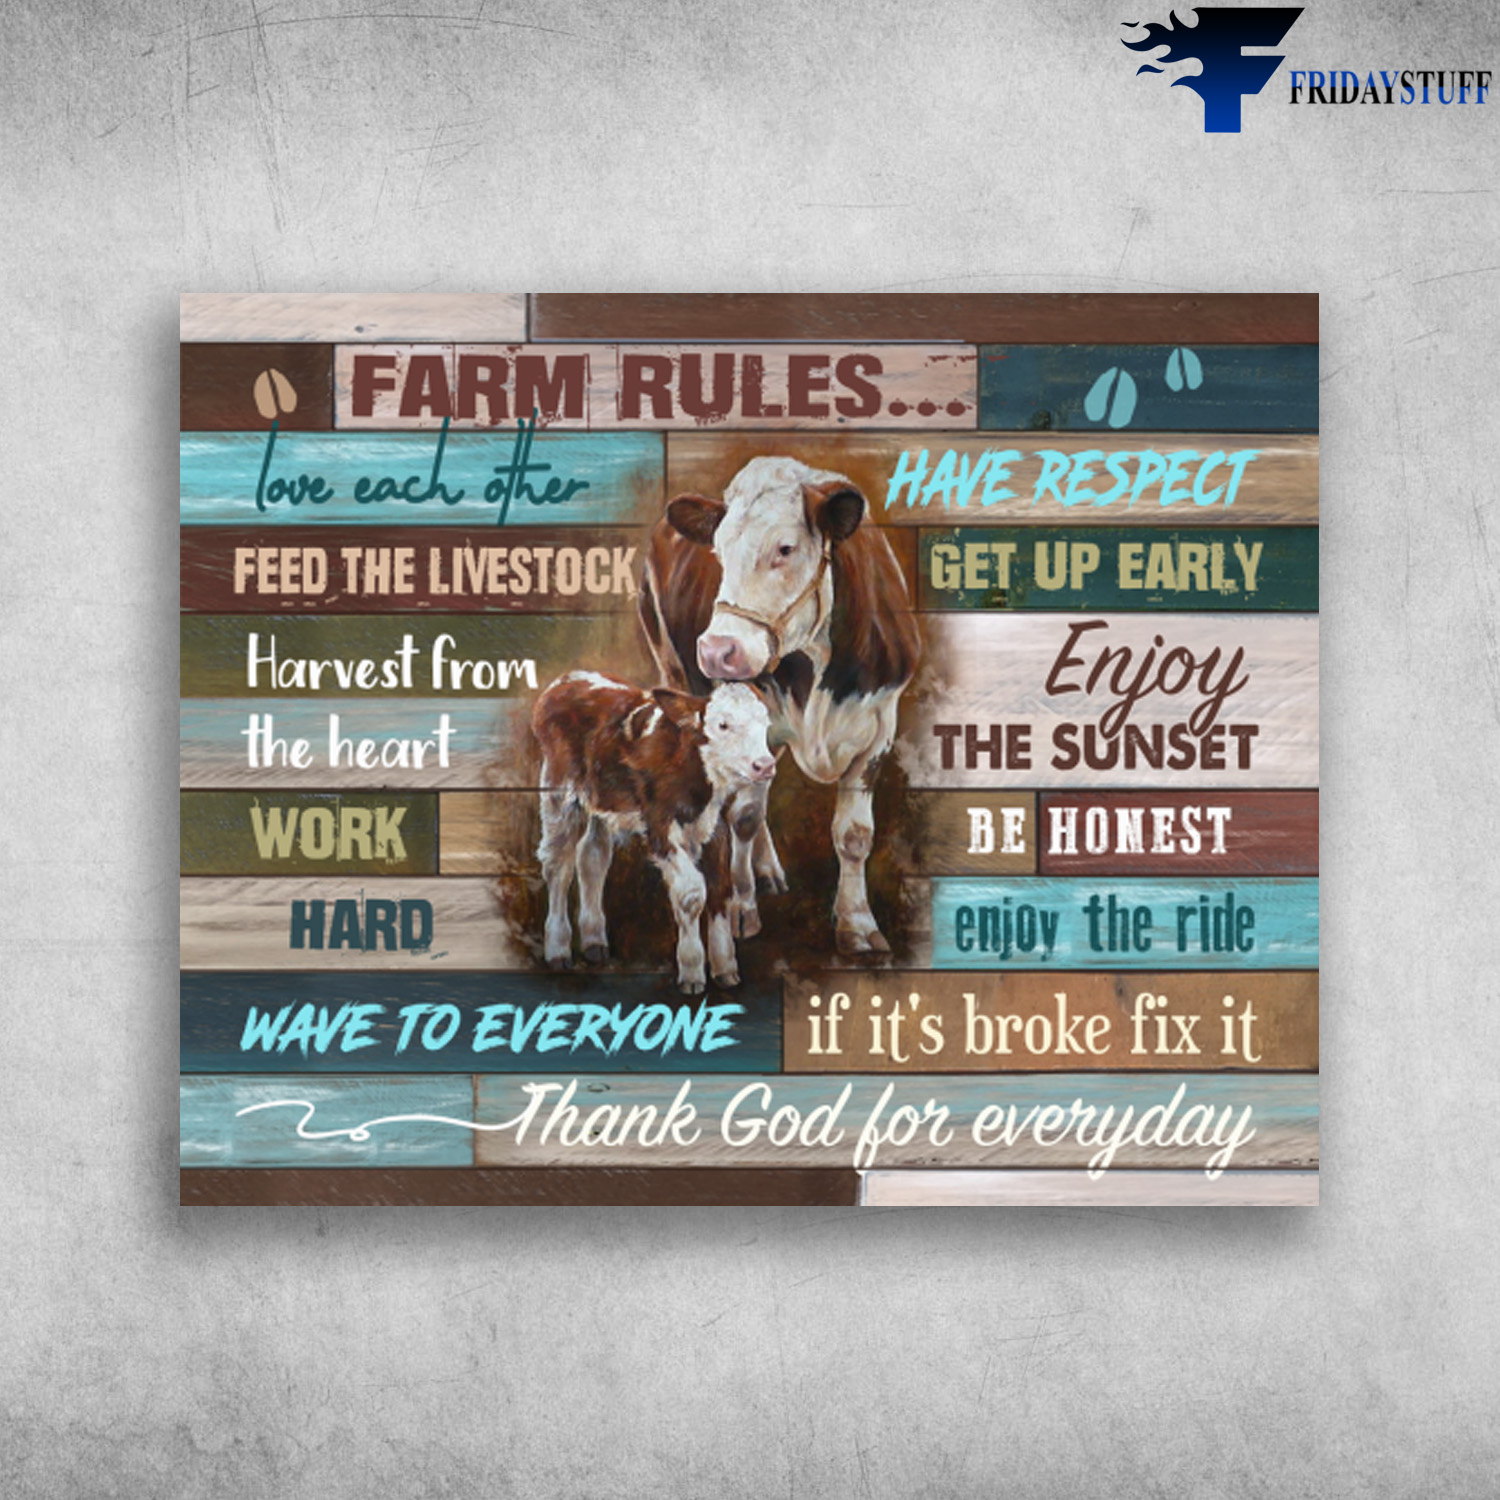 Dairy Cow Cattle Cow Farm Rules Thank God For Everyday